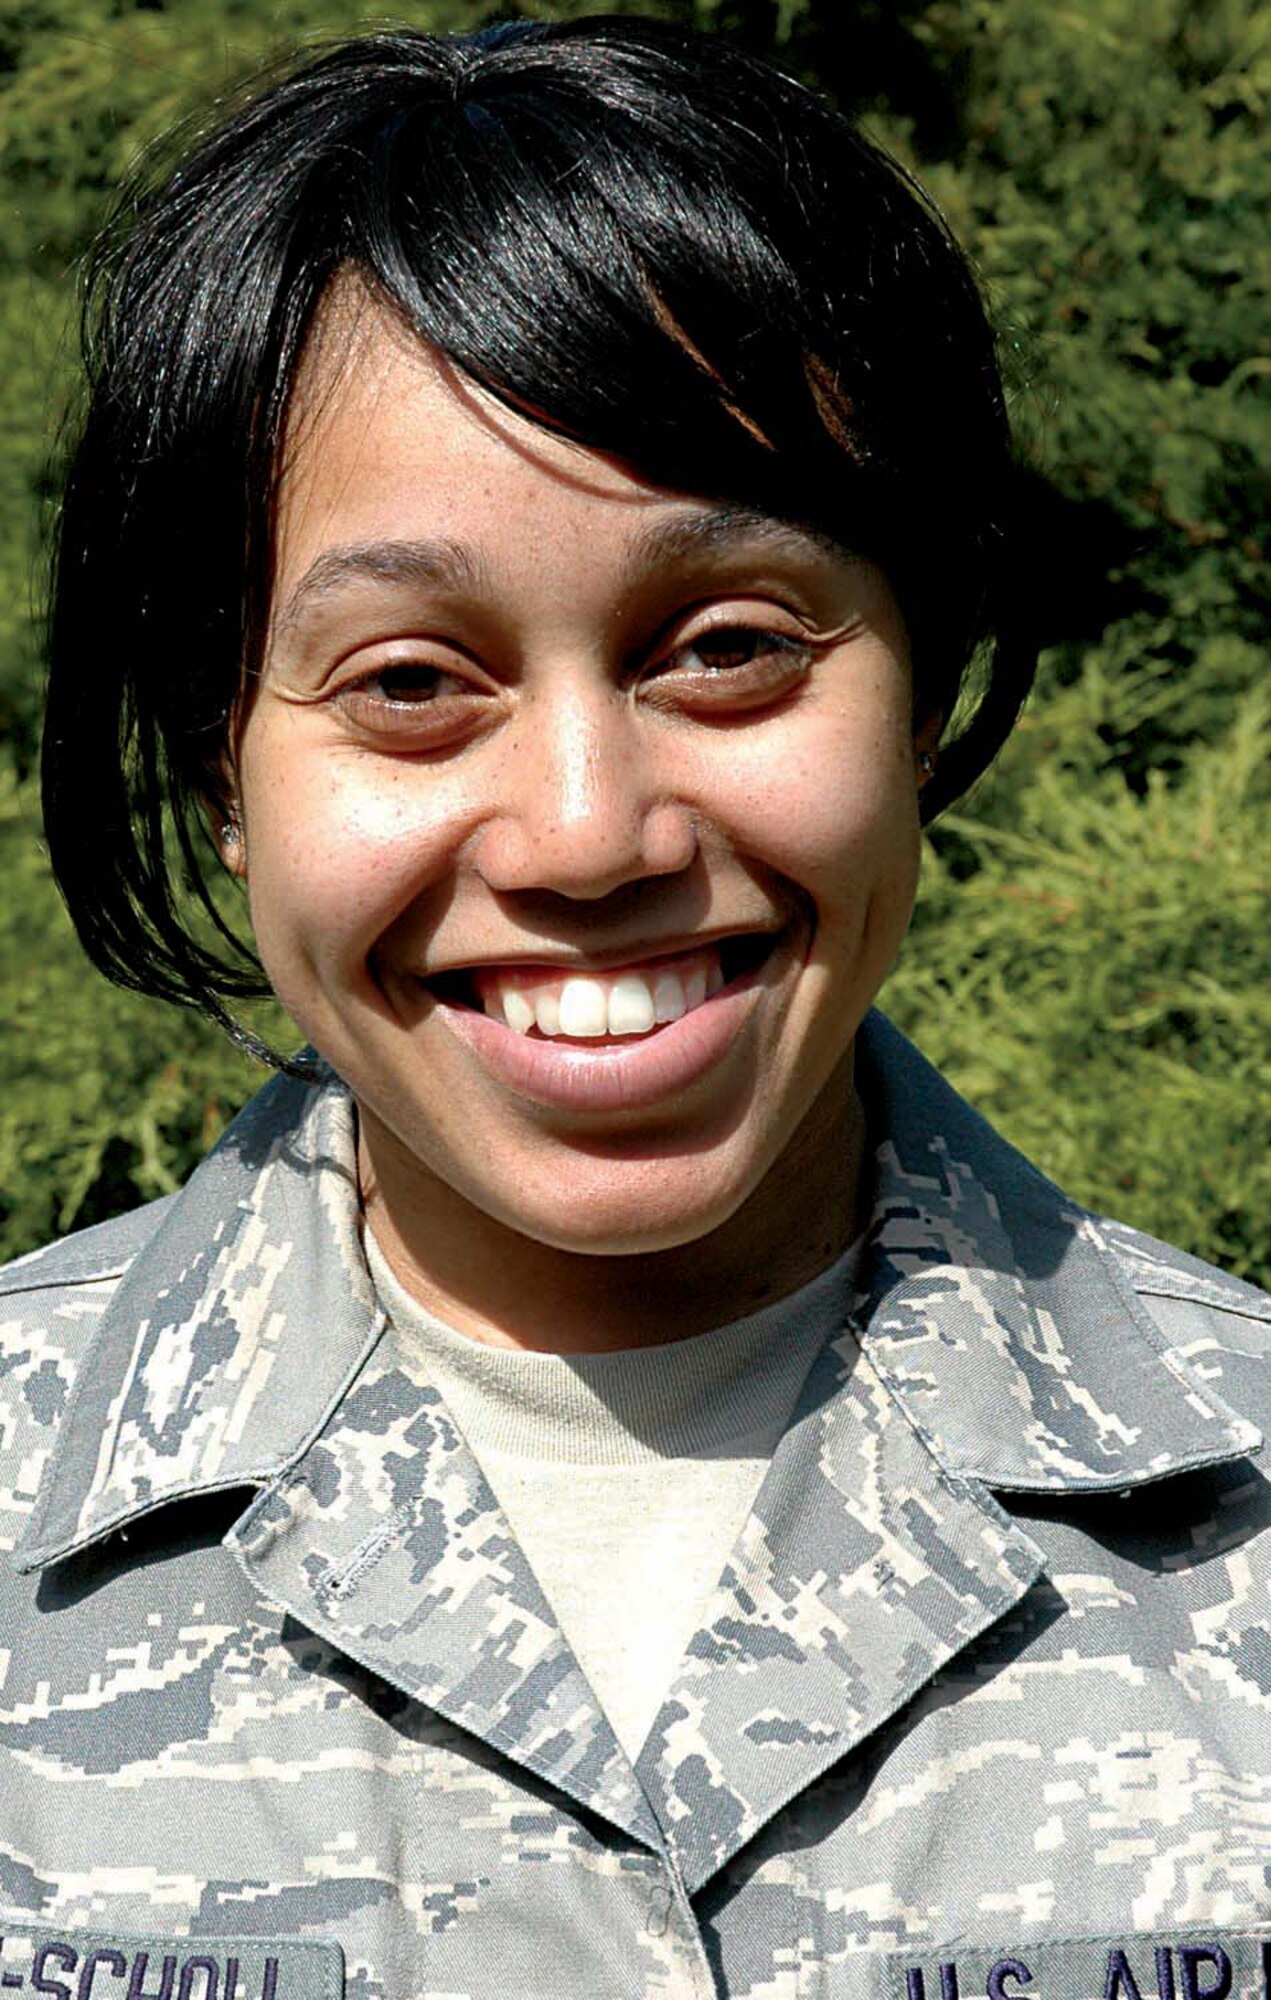 Senior Airman Channel Bolton-Scholl, 446th Maintenance Squadron, McChord Air Force Base, Wash.,  is the 2008 Airman of the Year in the Air Force Reserve Command. She earned this honor based on her contributions to the mission, her display of leadership, and her dedication in the Air Force Reserve.  She grew up in Eugene, Ore.  Airman Bolton-Scholl joined the Air Force Reserve in March 2005. 